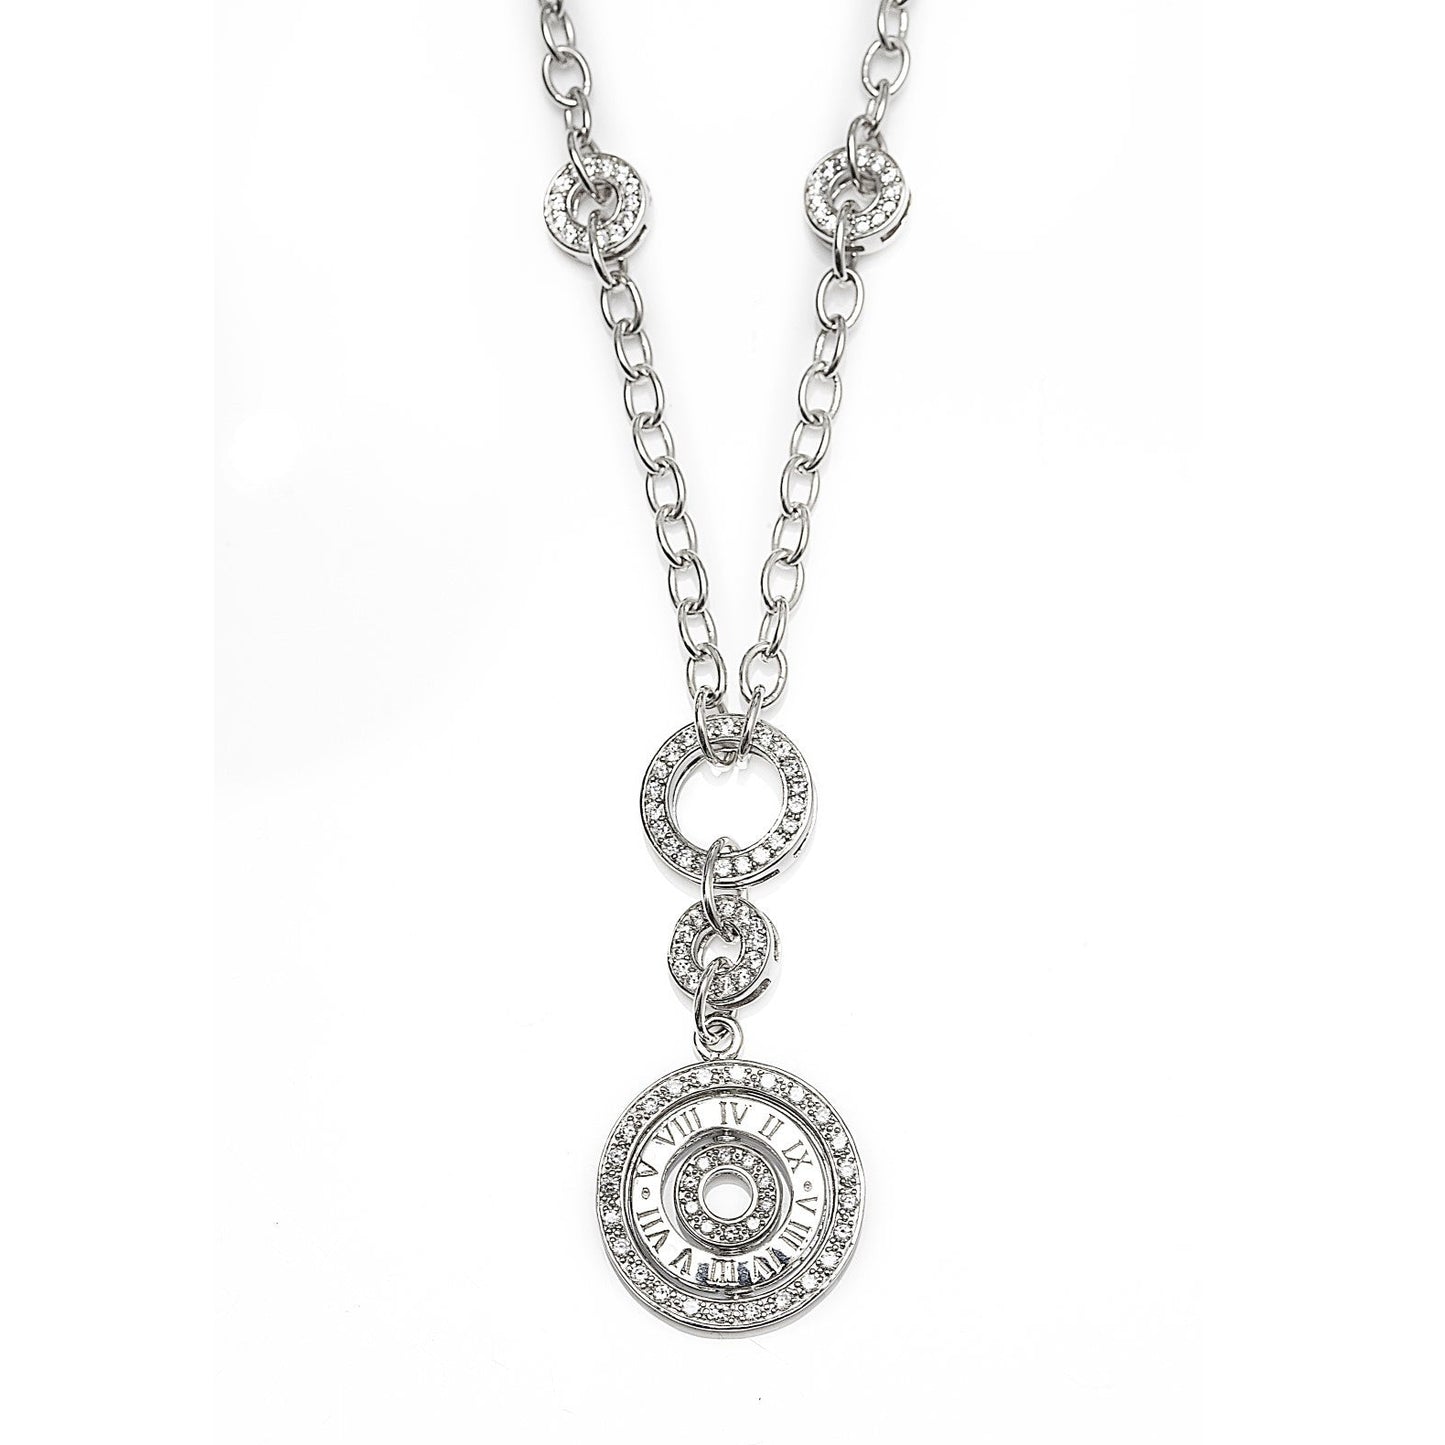 Amazing Short Juicy Necklace in 925 Sterling Silver with a Flip Pendant with Roman Numerals and cubic zirconia. Worldwide shipping from Australia.  Affordable luxury jewellery by Bellagio & Co.